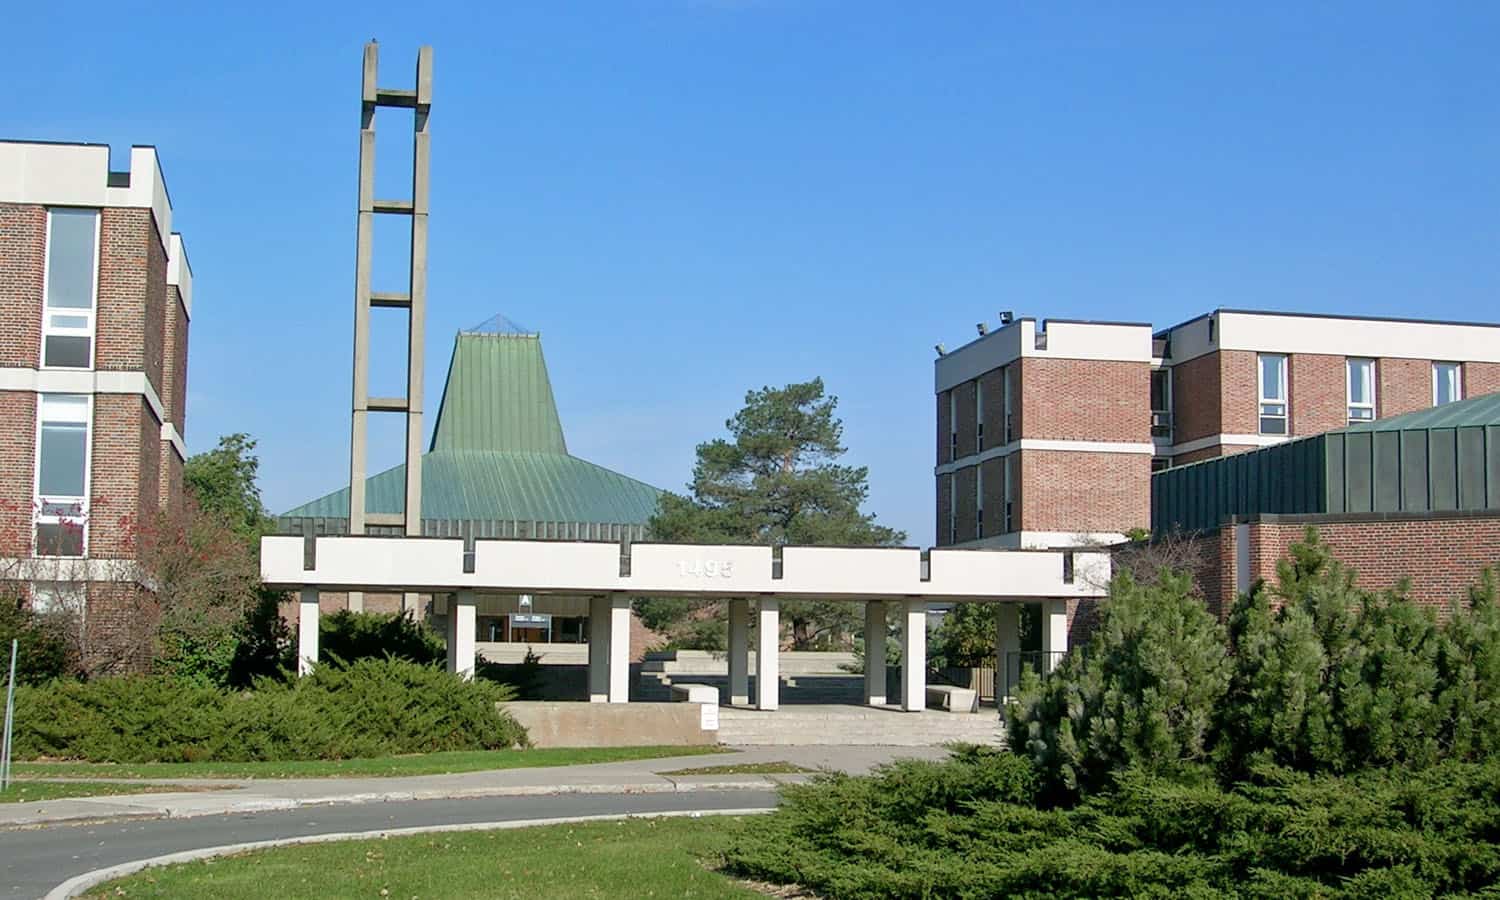 The main entrance to campus with the former chapel beyond